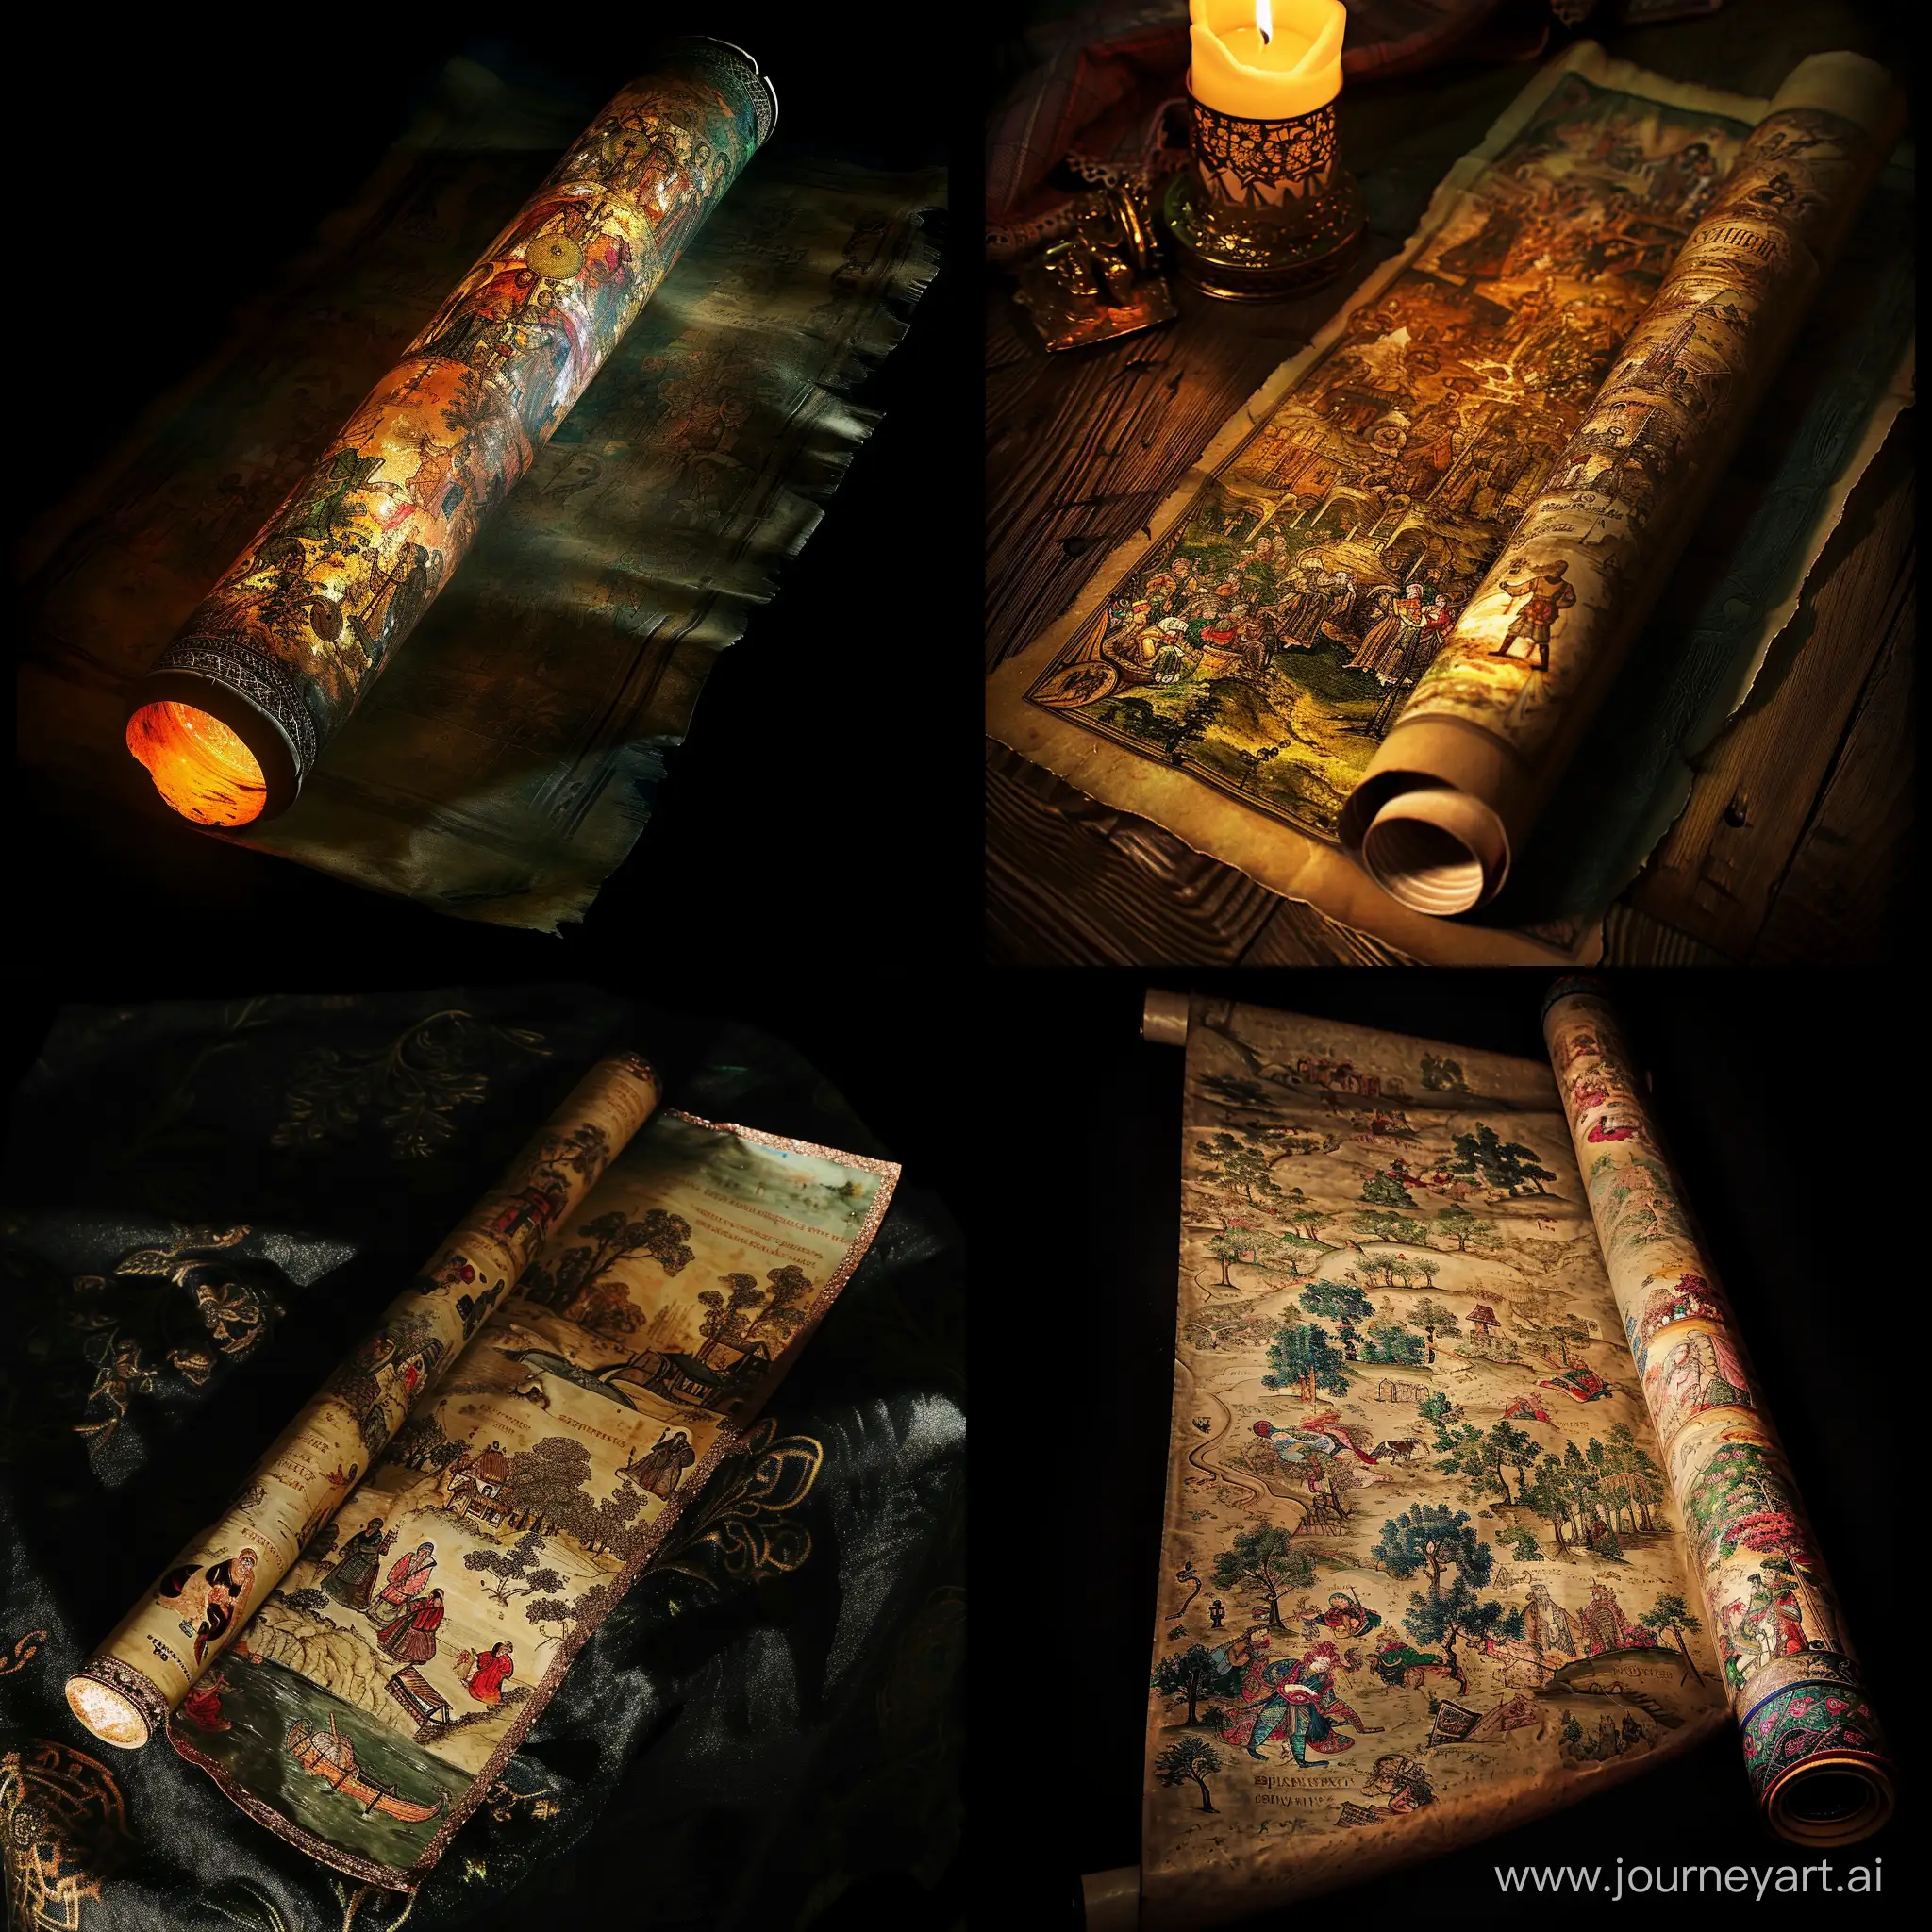 an ancient scroll depicting a fairy tale about "Tales of Tsar Saltan" (HD, dark lighting)